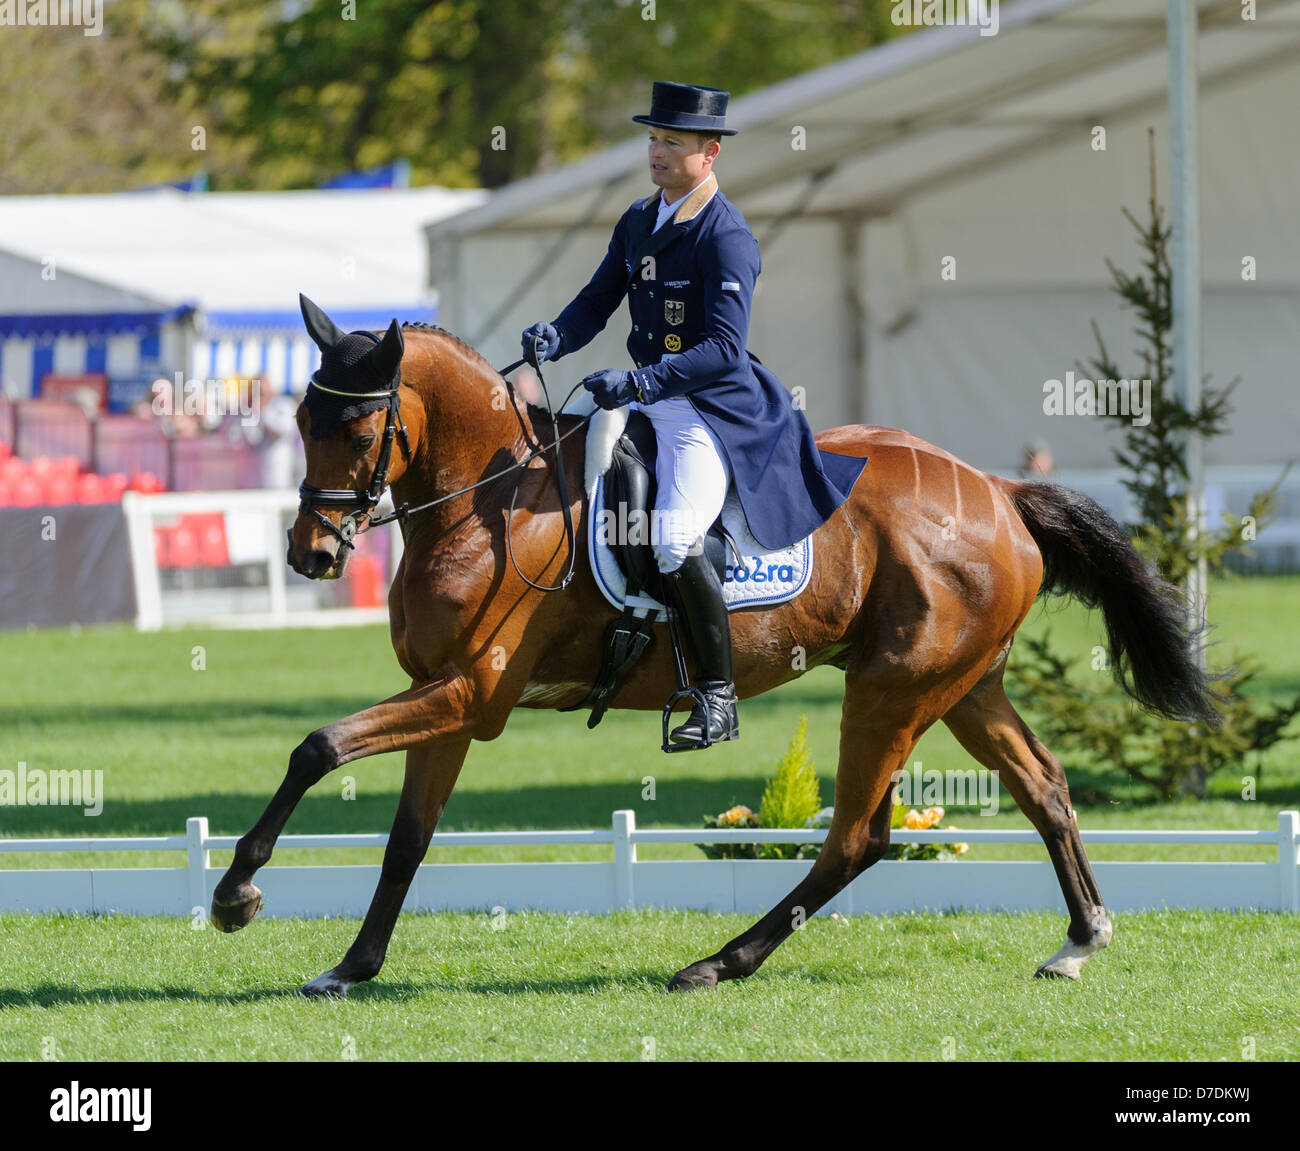 Badminton, UK. 4th May, 2013. World and European Champion Michael Jung of Germany and his horse LA BIOSTHETIQUE - SAM FRW lead after the Dressage phase of the Mitsubishi Motors Badminton Horse Trials, Saturday May 4th 2013 Stock Photo